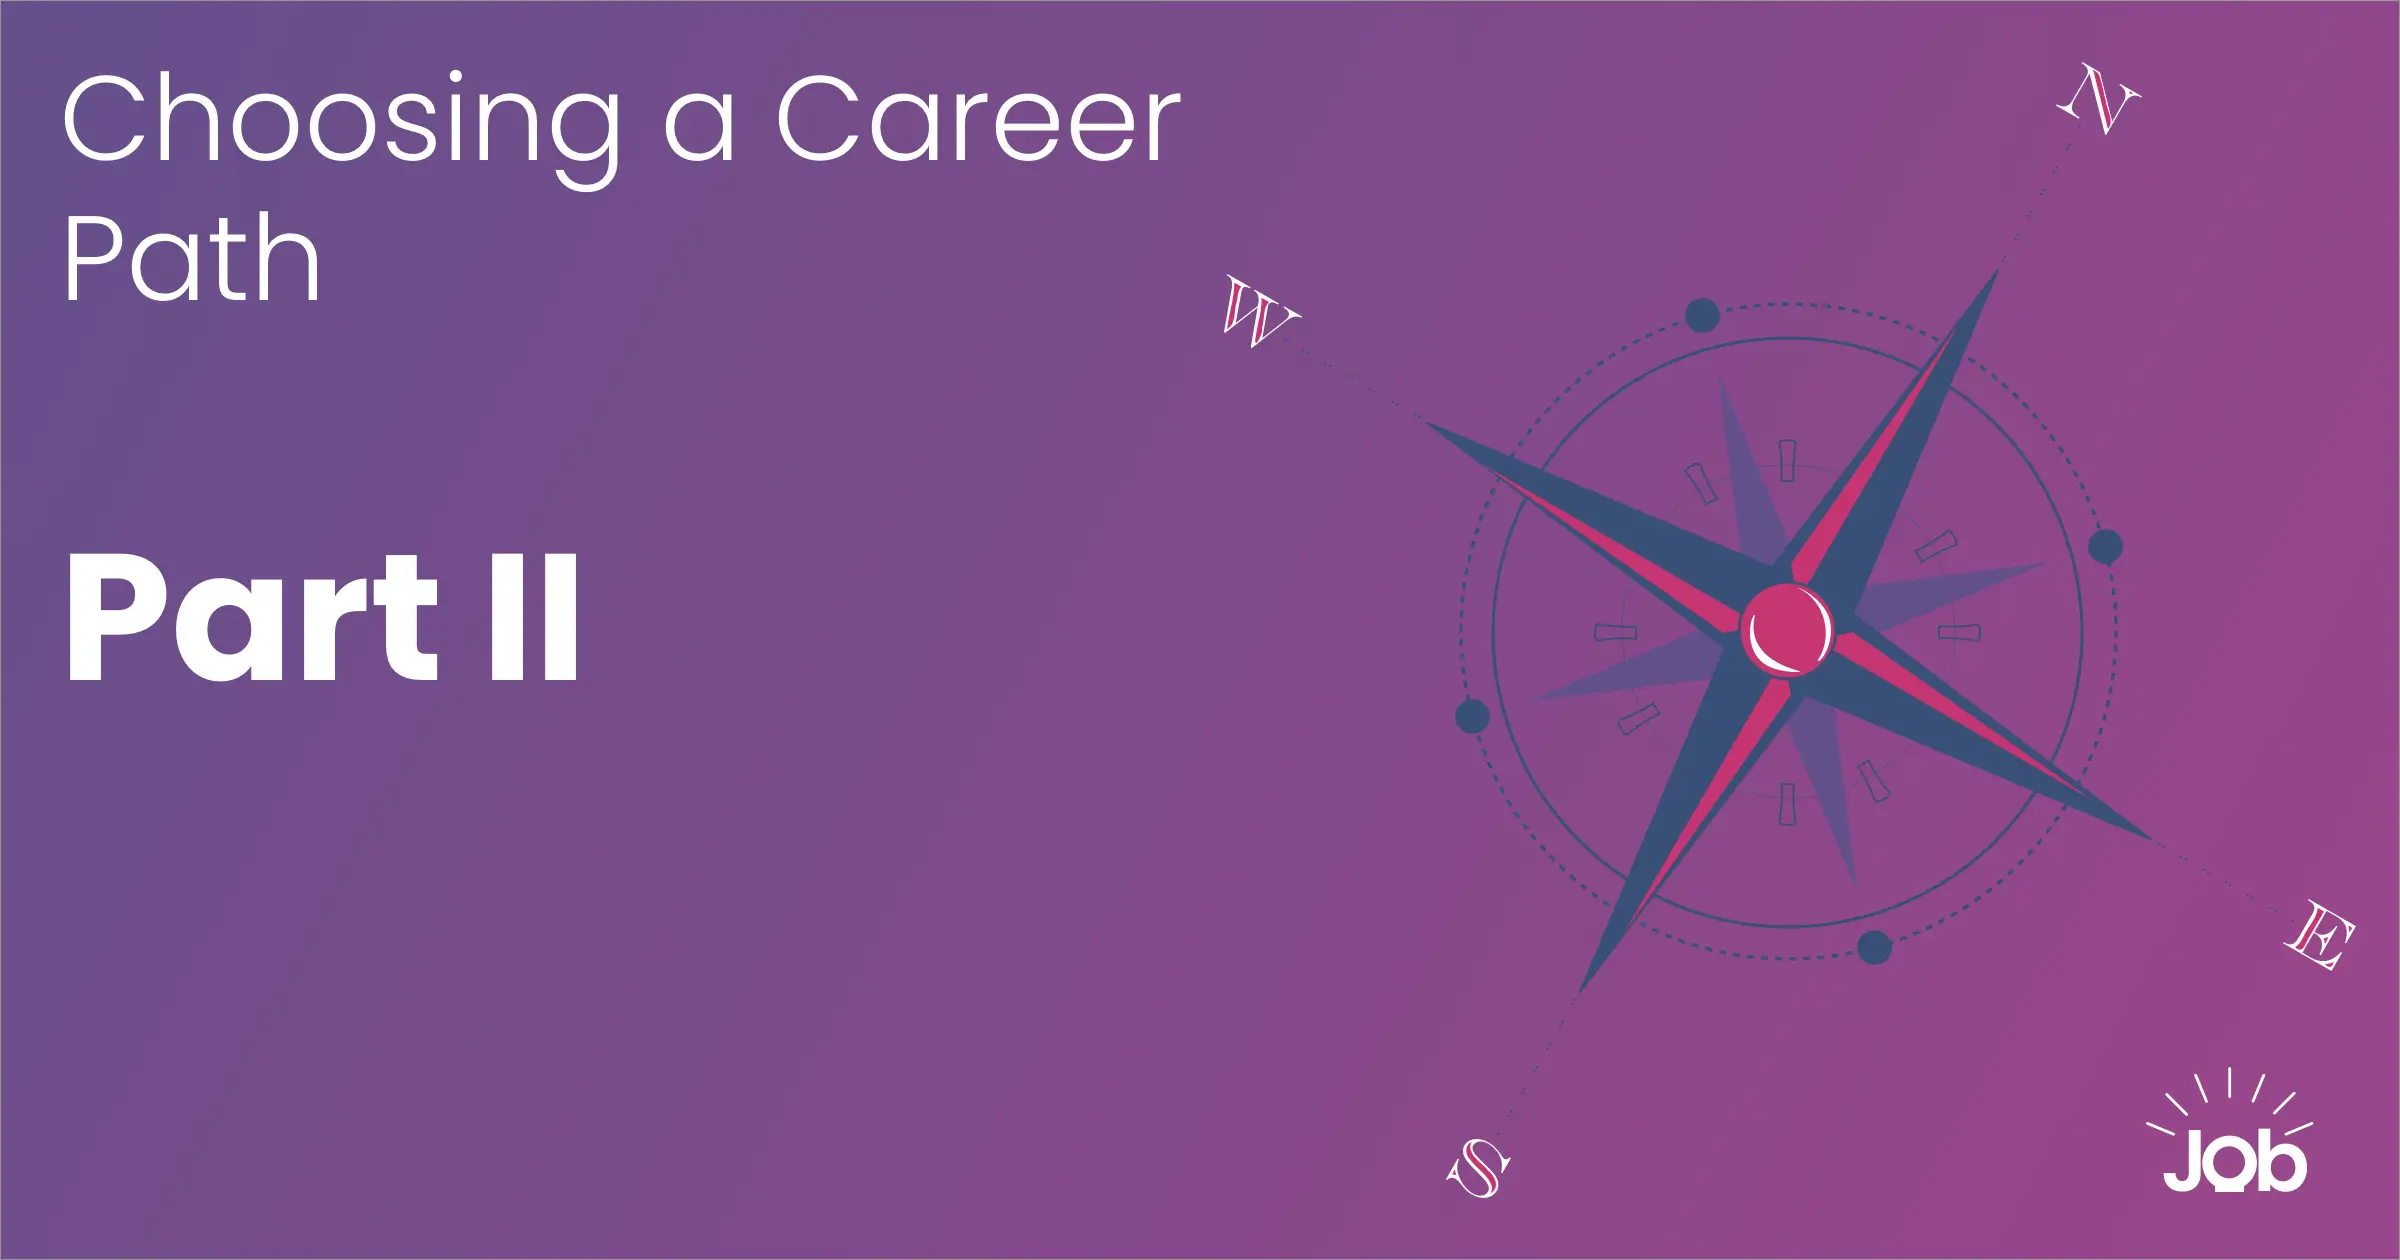 SMARTer Job Hunting Advice on choosing a career path part 2 image with compass in background.